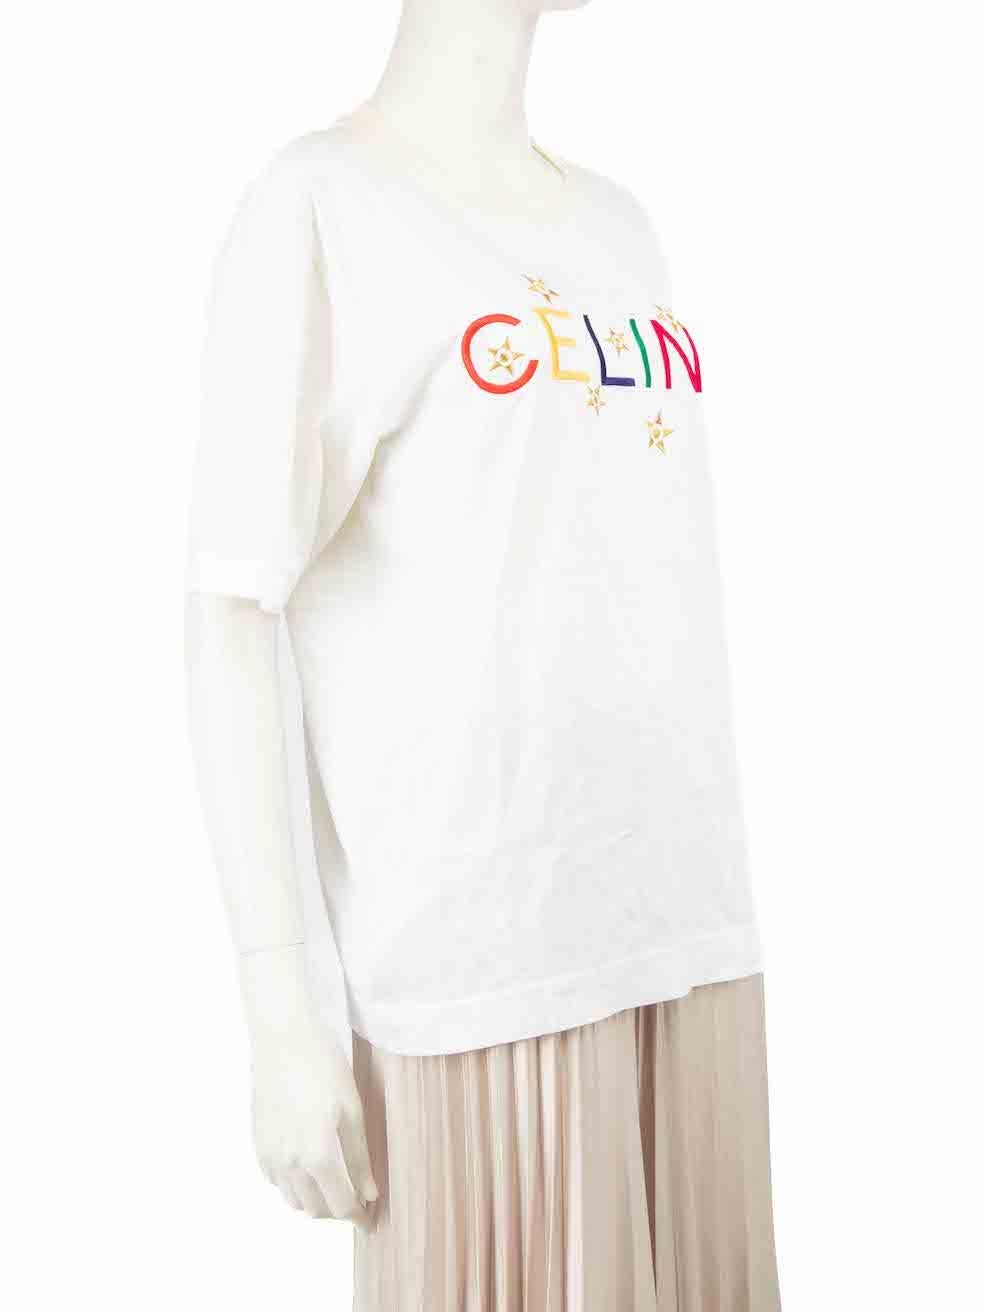 CONDITION is Good. Minor wear to top is evident. Light wear to the fabric surface with spots of light discolouration seen throughout on this used Céline designer resale item.
 
 
 
 
 
 Details
 
 
 White
 
 Cotton
 
 T-shirt
 
 Embroidered logo